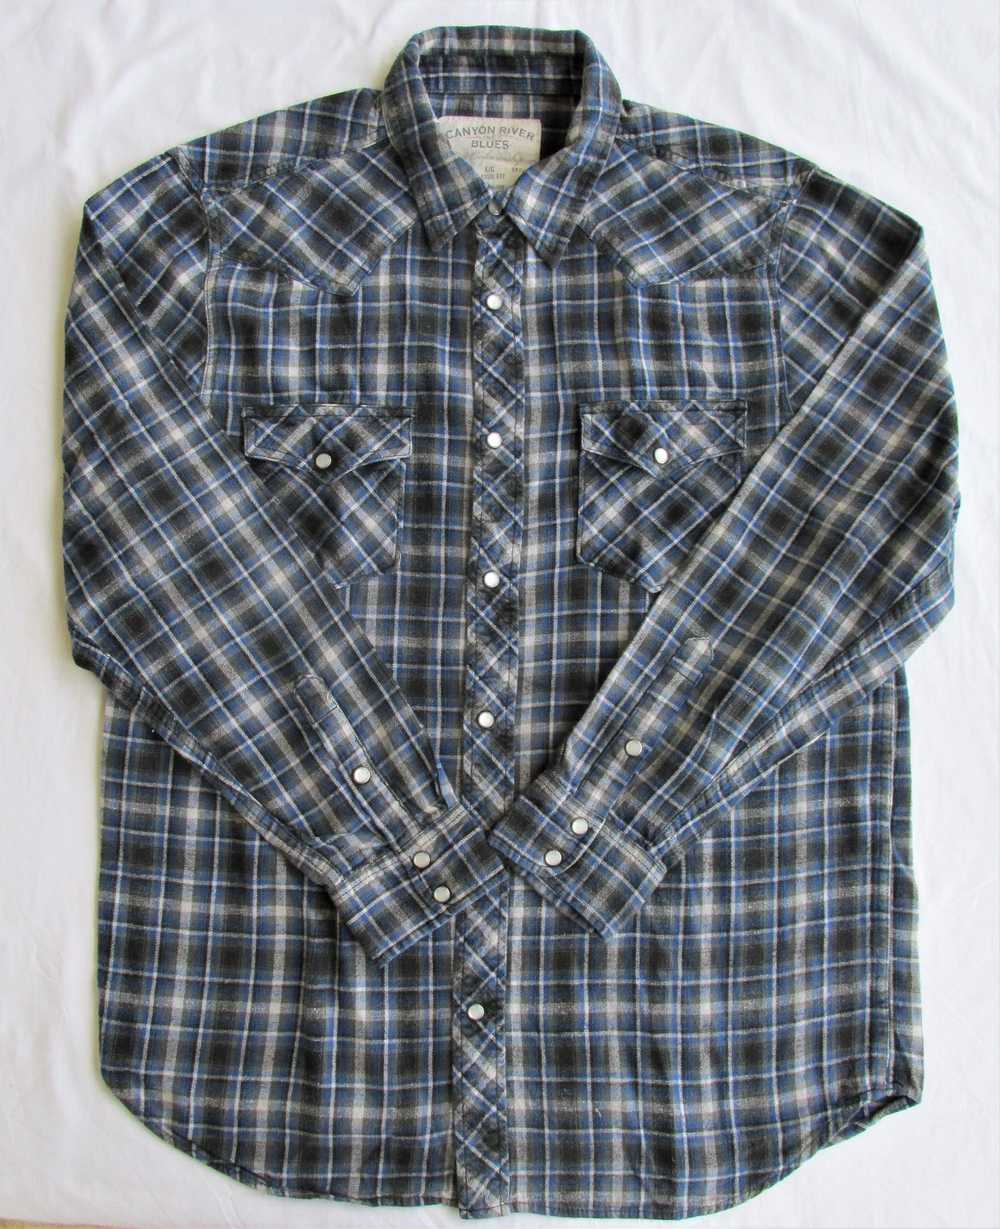 Other Canyon River Western Cotton Flannel Shirts … - image 1